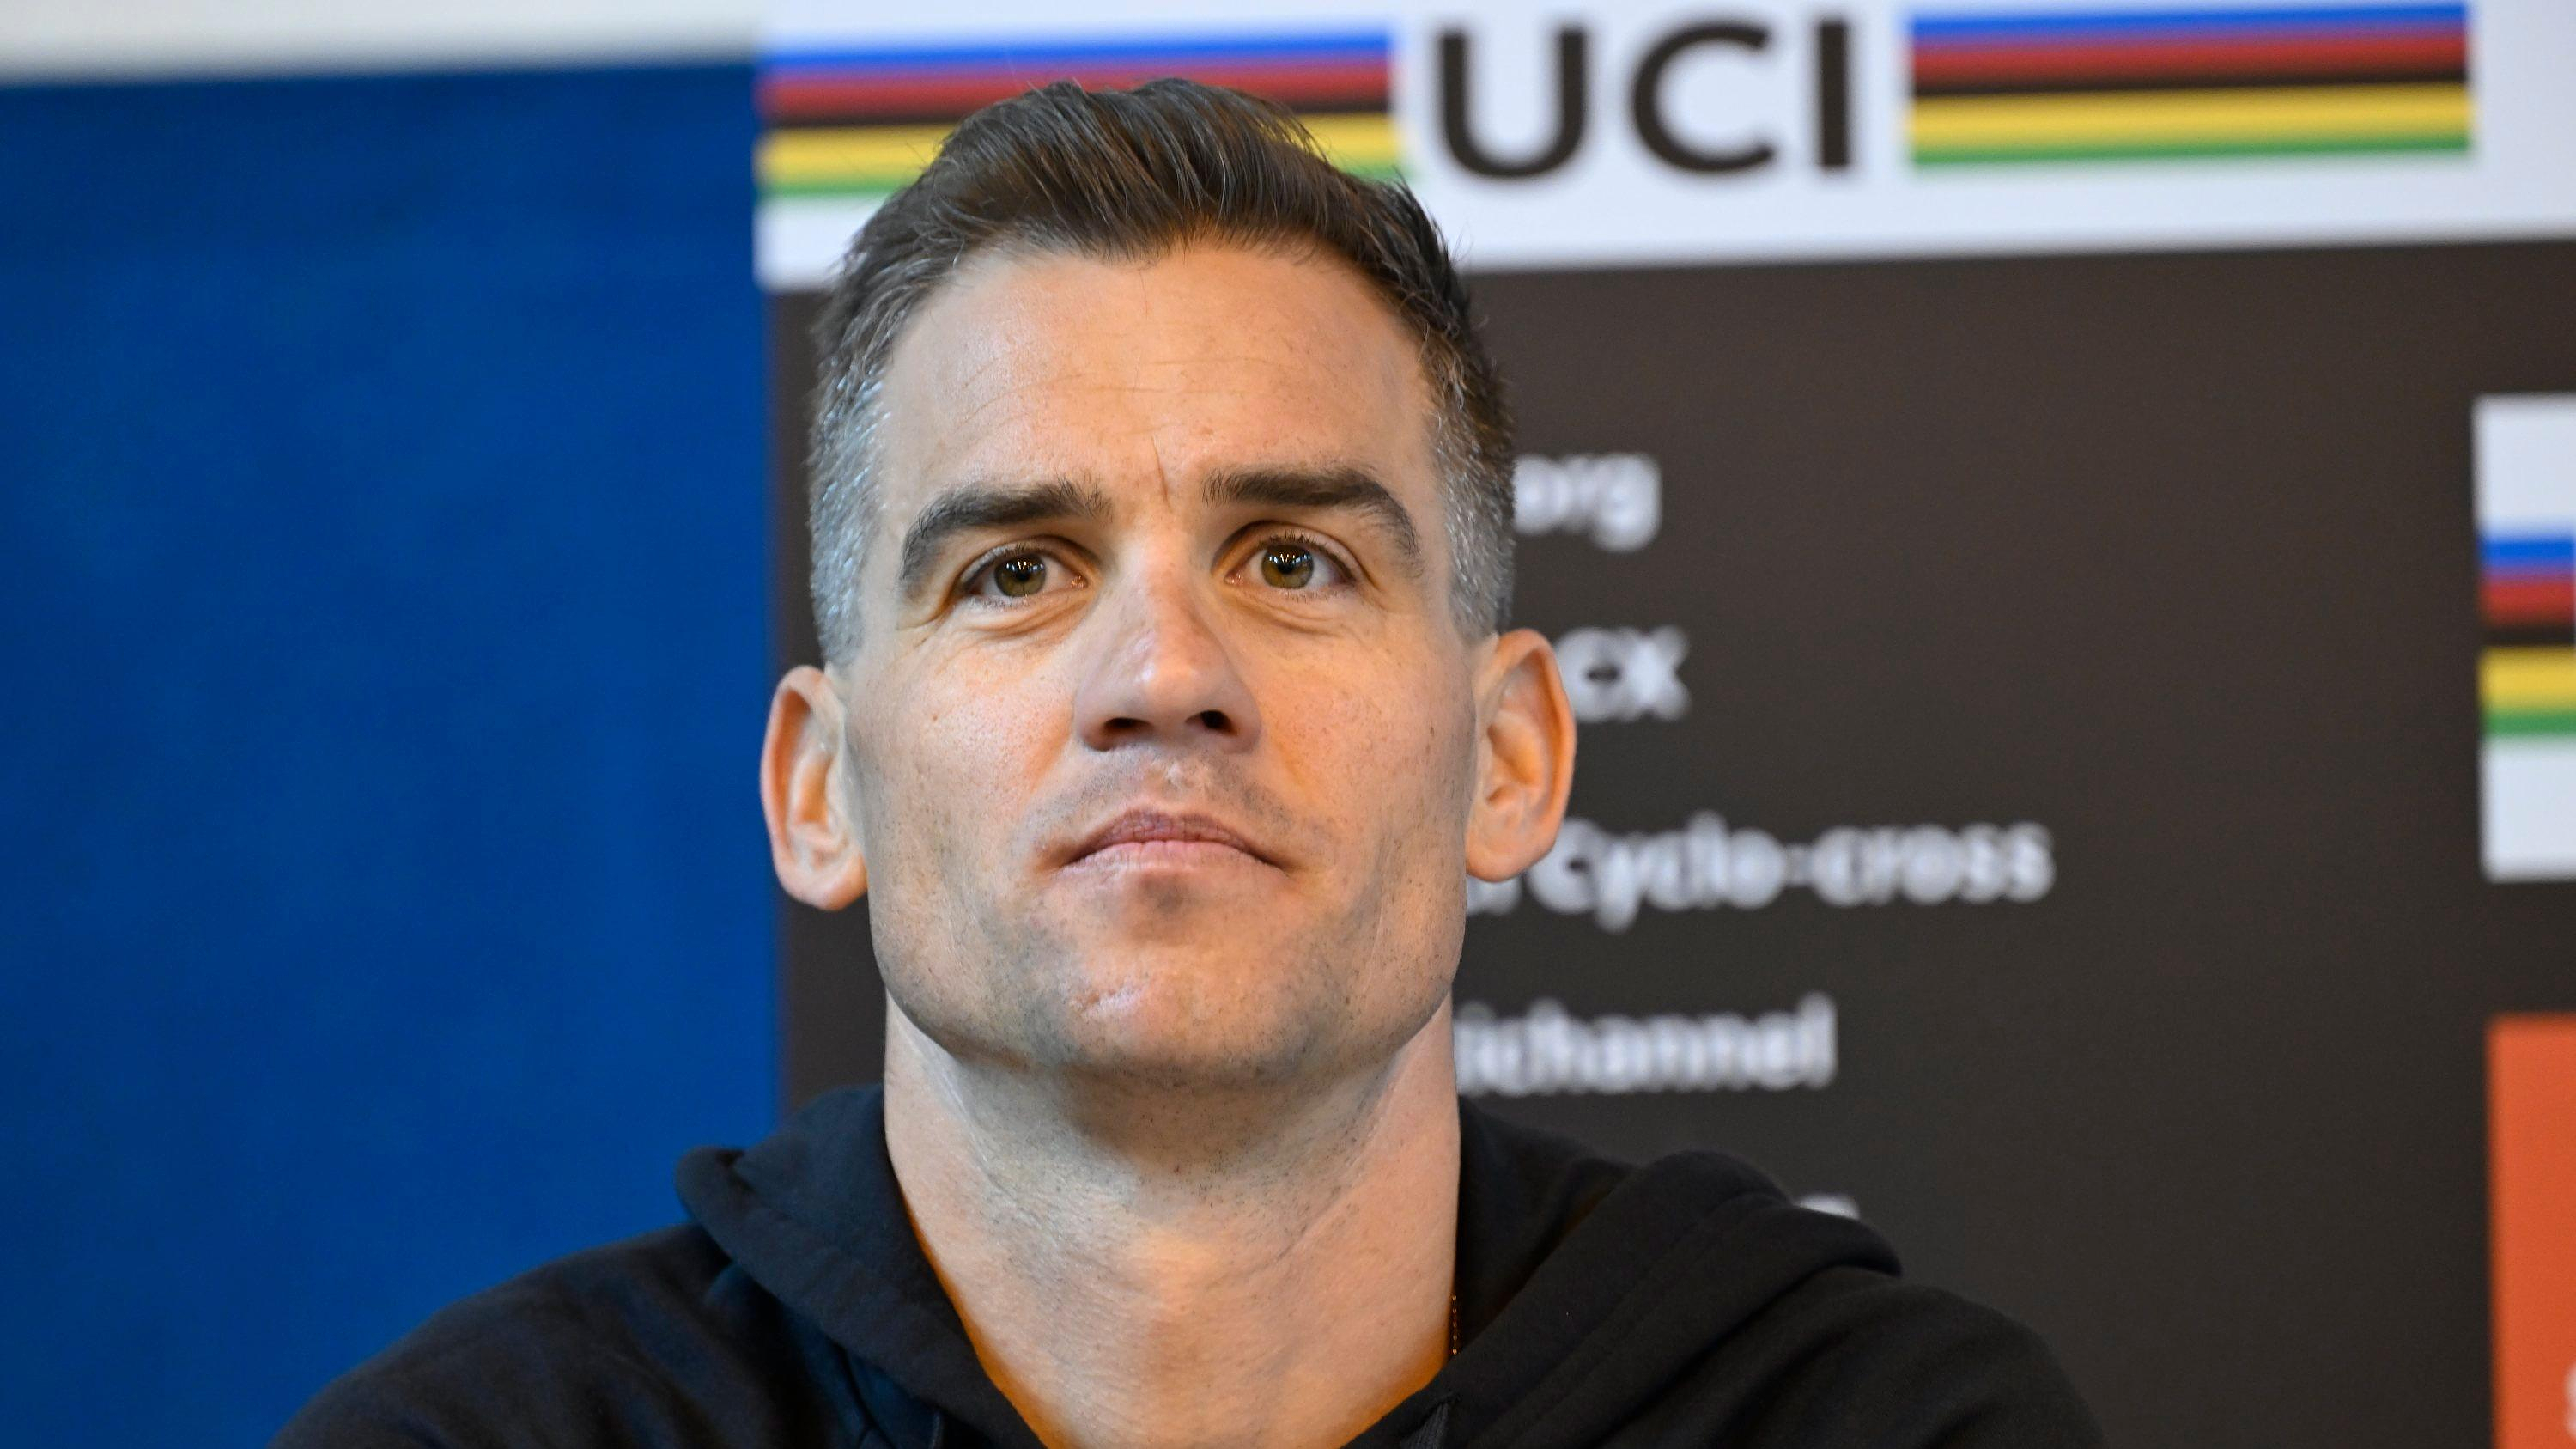 Cyclo-cross: Zdenek Stybar, three-time world champion, will end his career after the Worlds